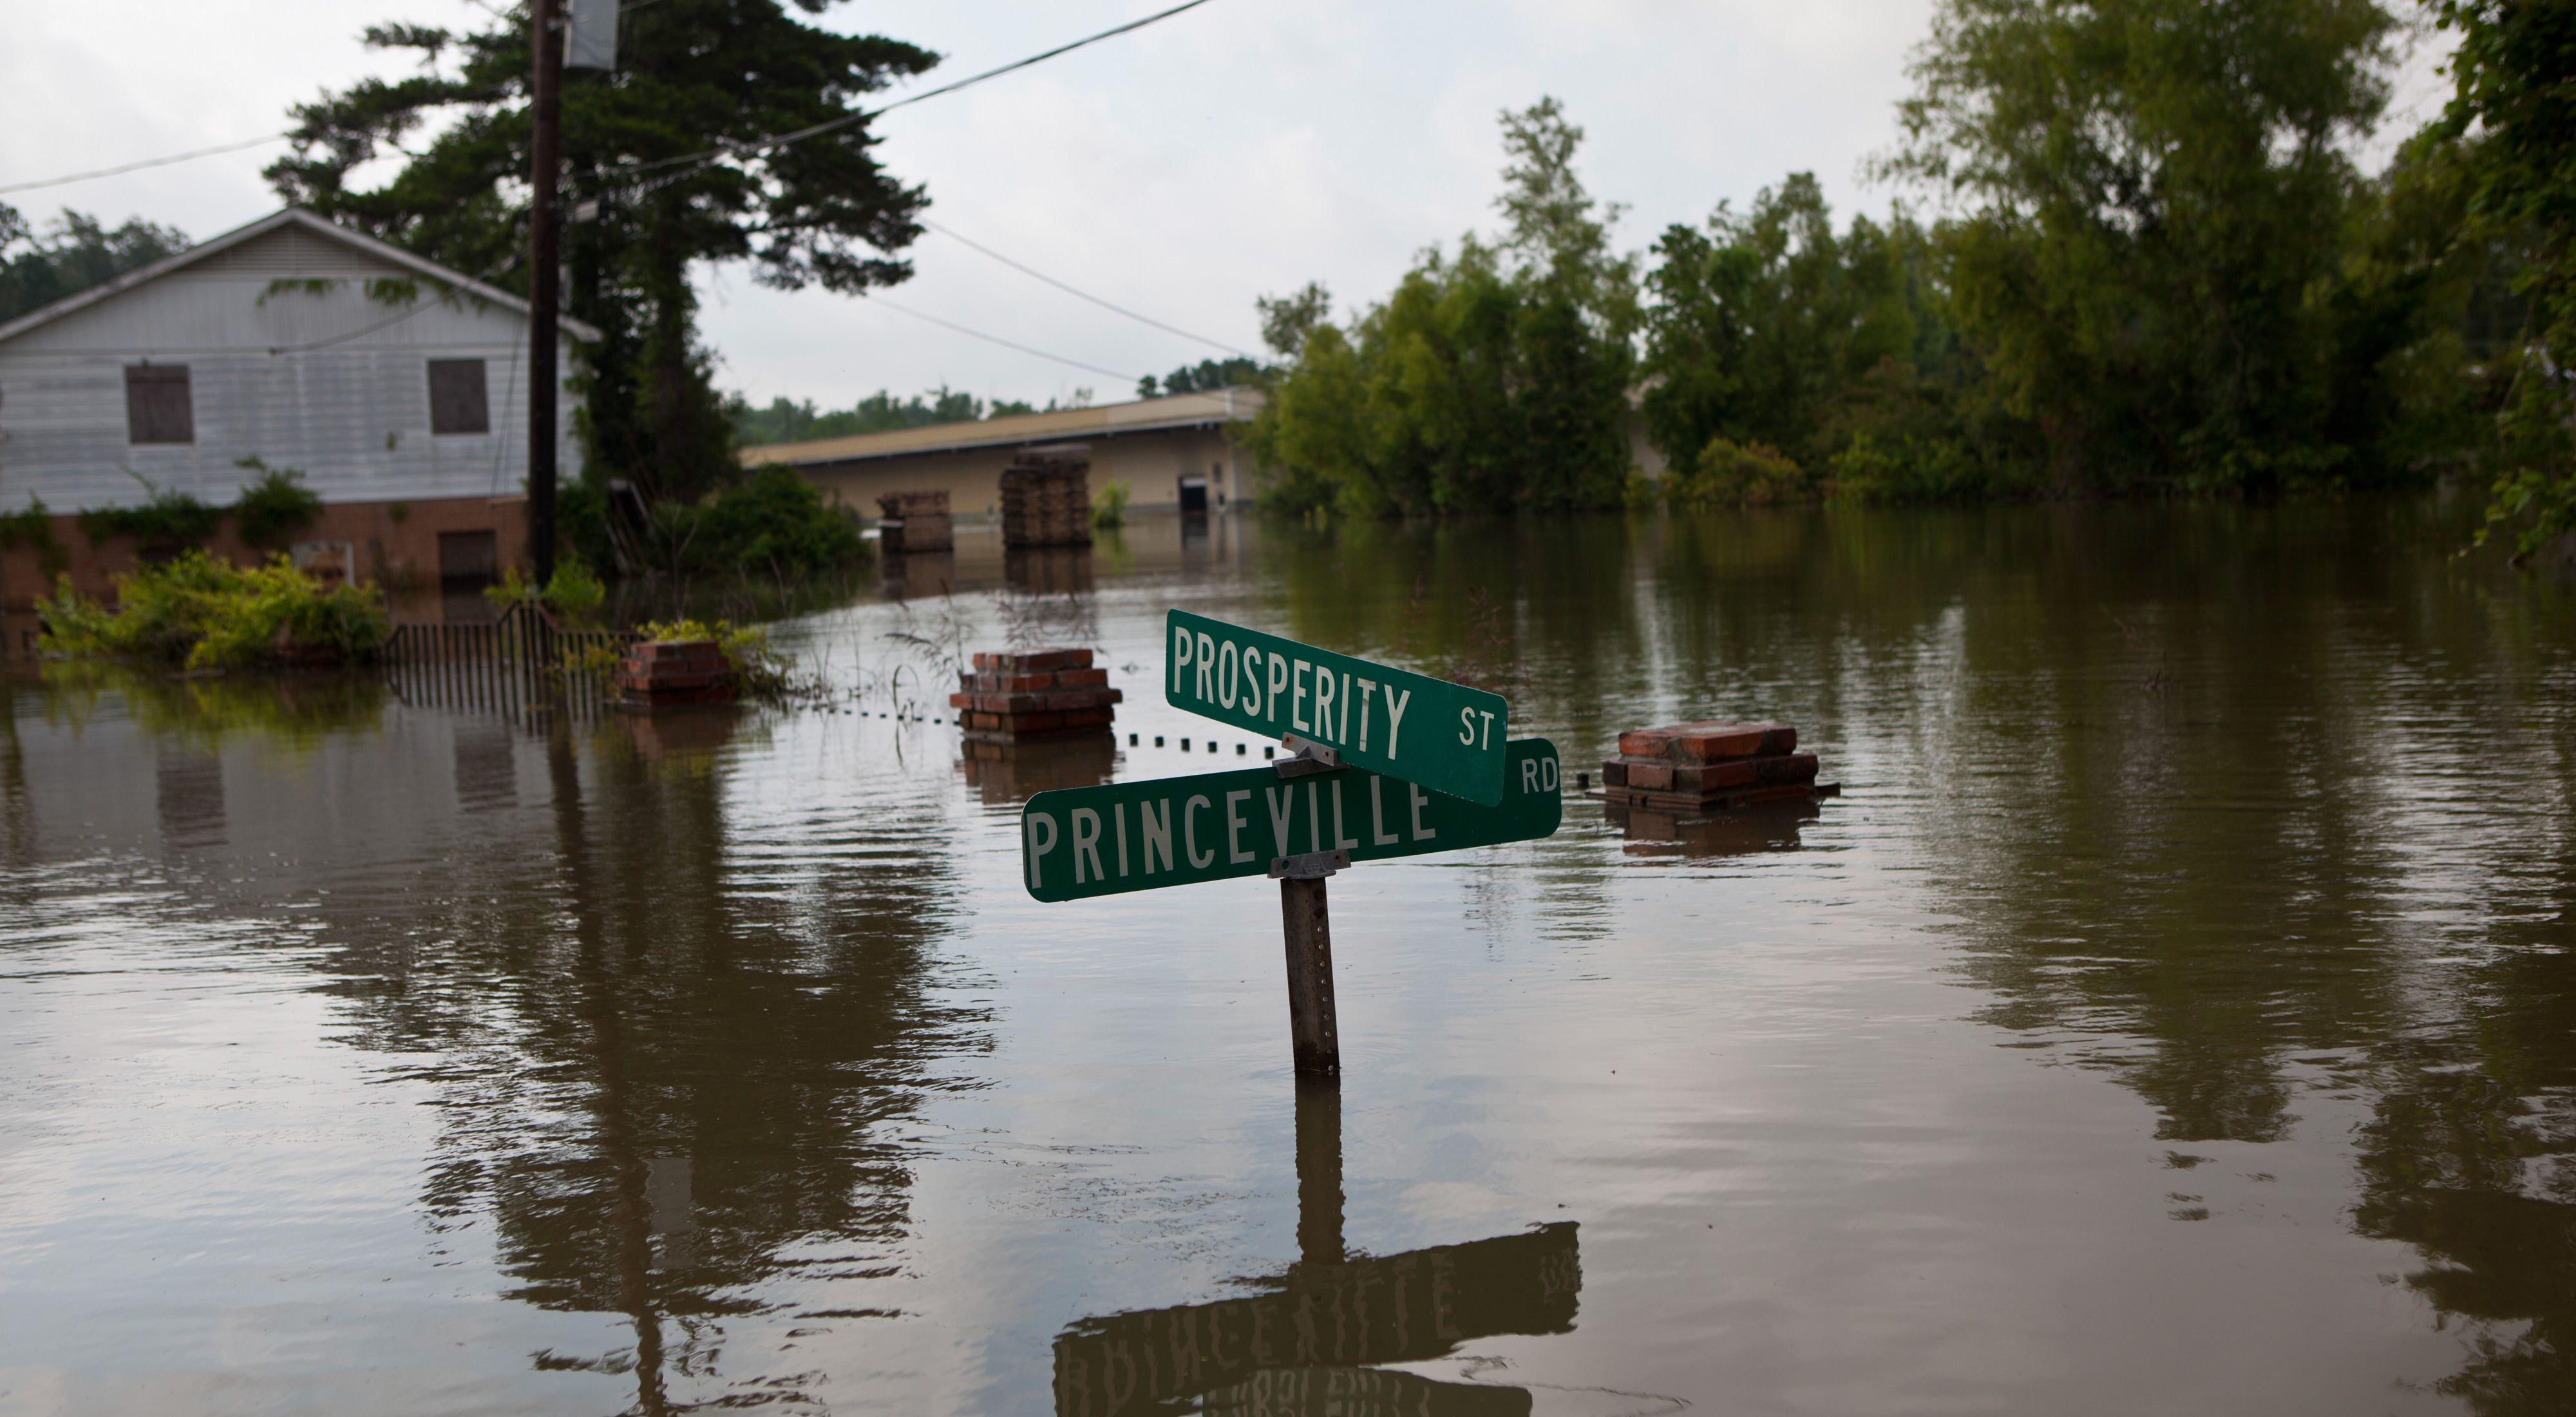 A street sign emerges from water in a flooded community.